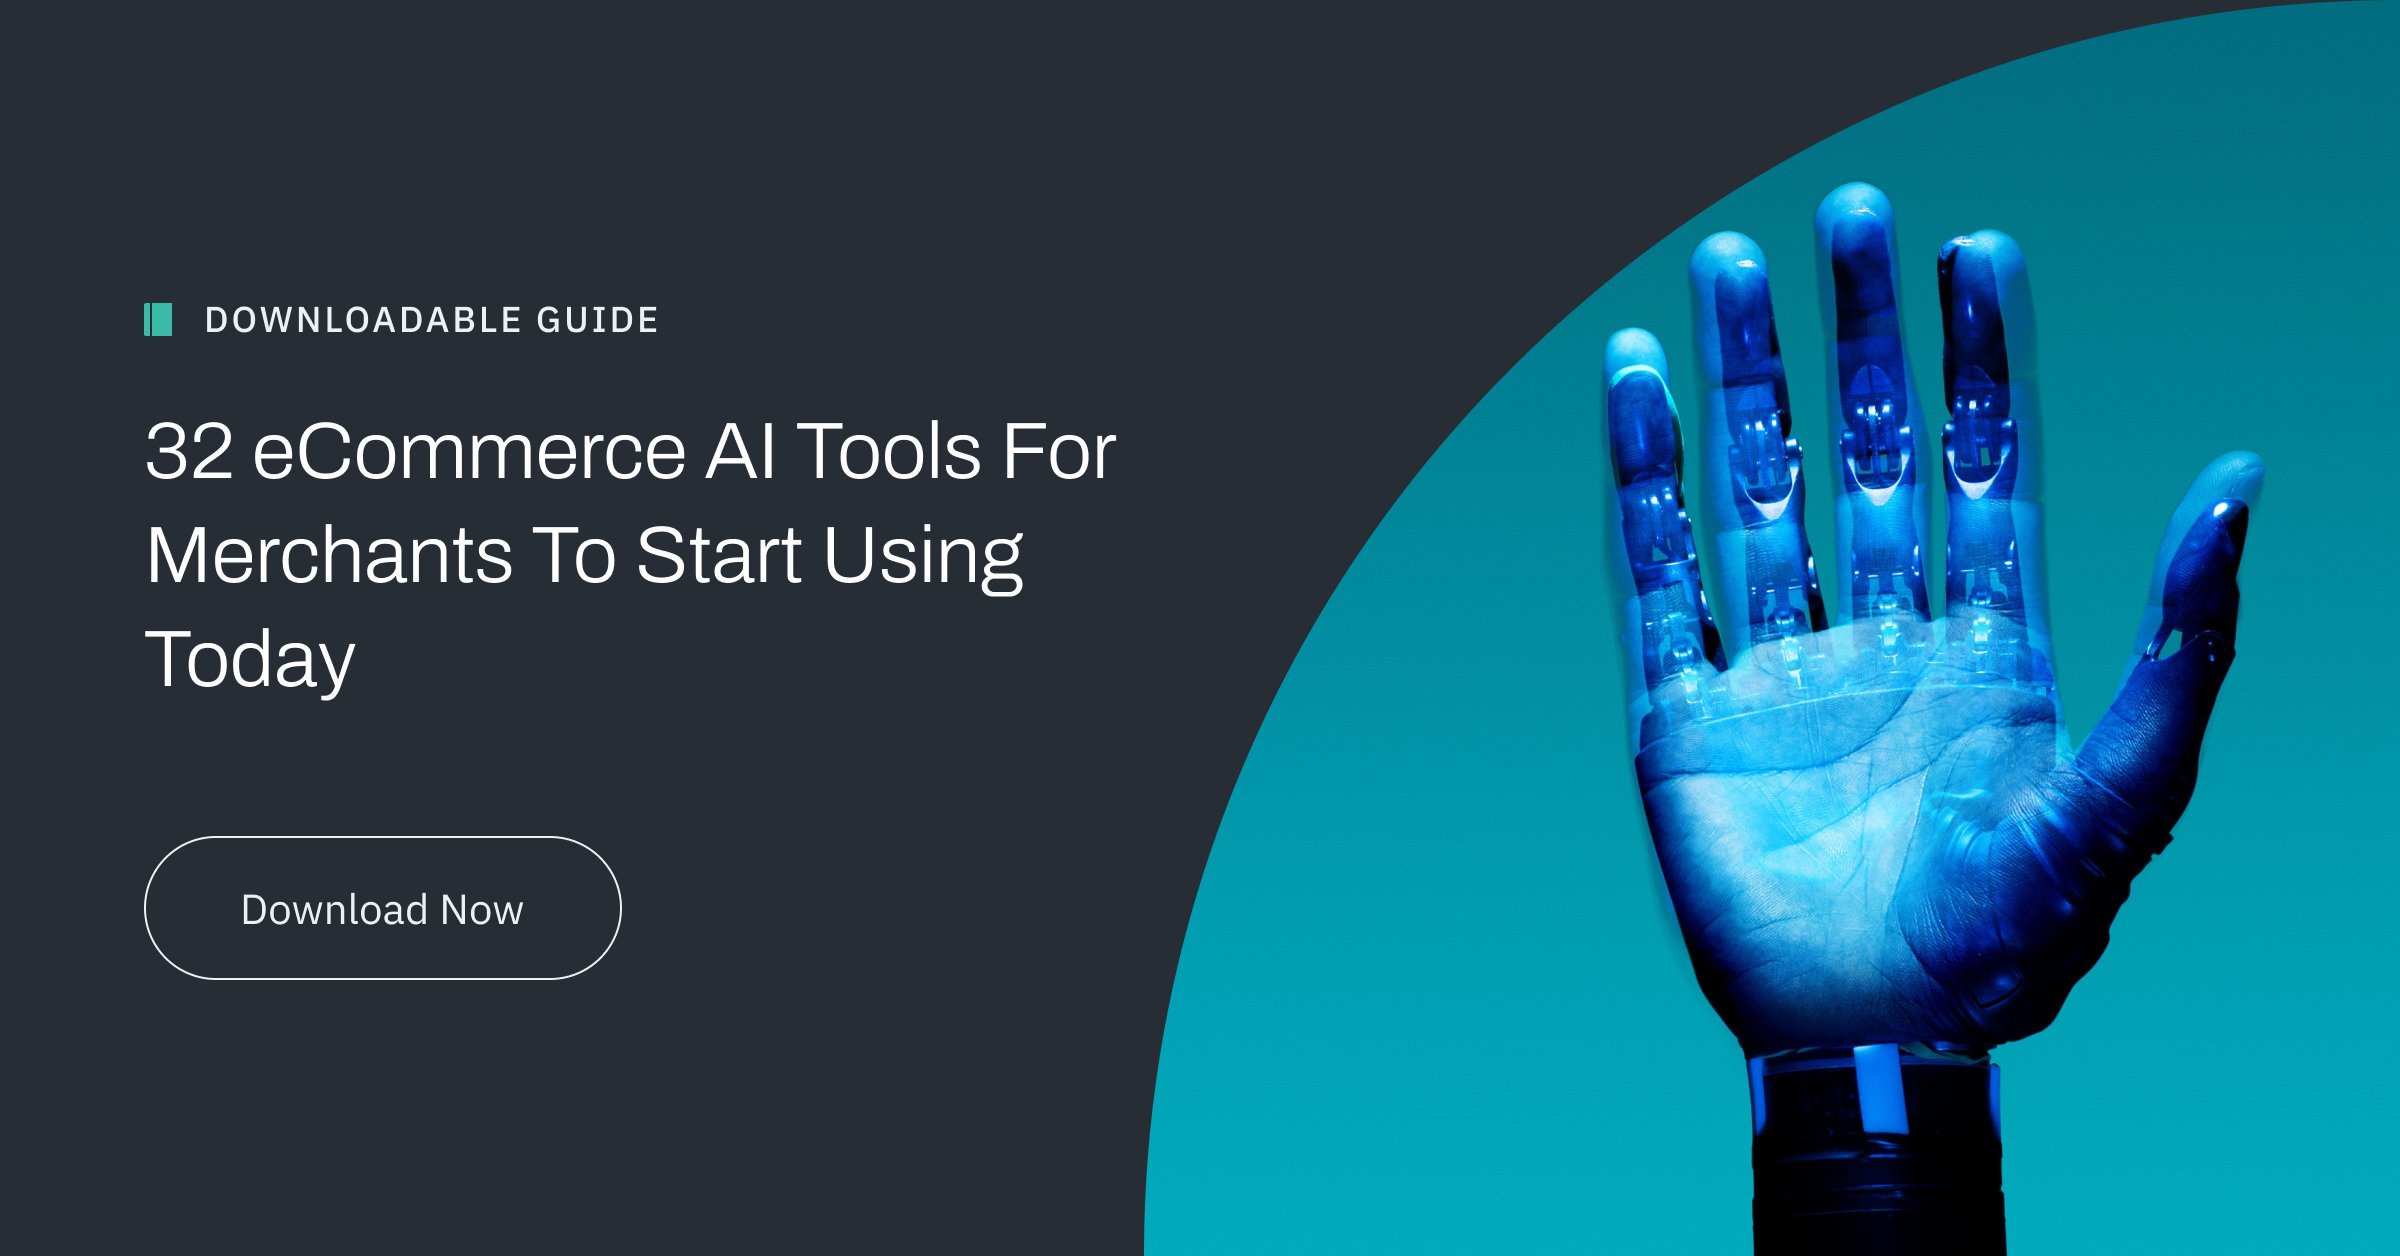 7 AI Tools For eCommerce Merchants To Start Using Today - Promo Image